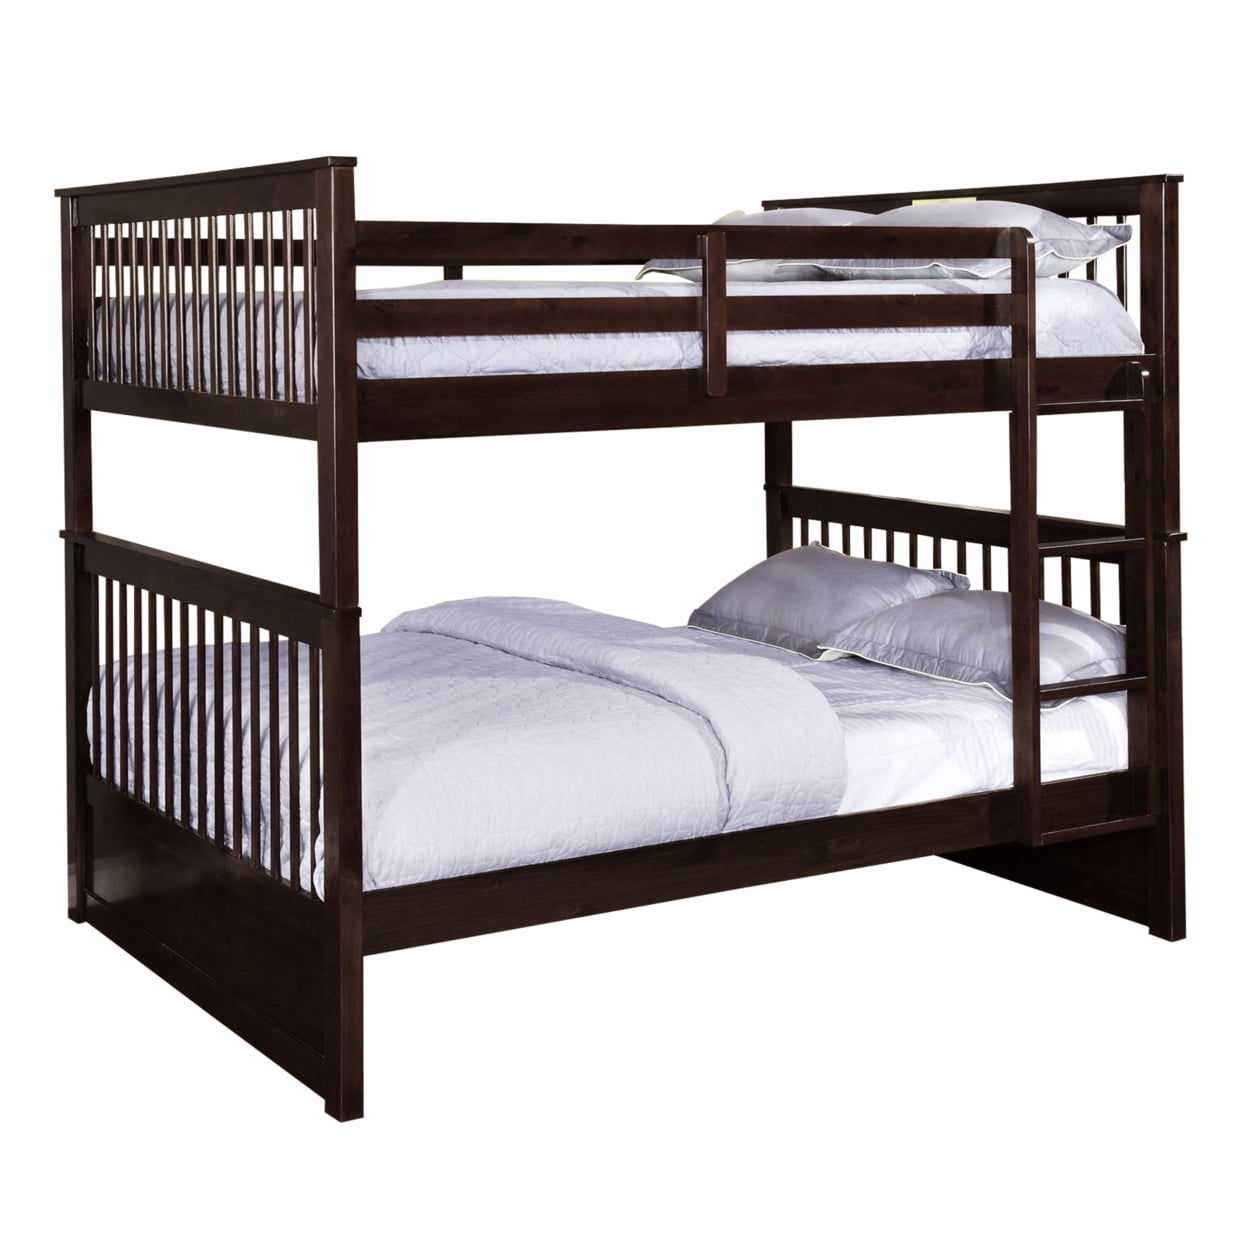 Bm229083 Full Over Full Wooden Bunk Bed With Slatted Details, Brown